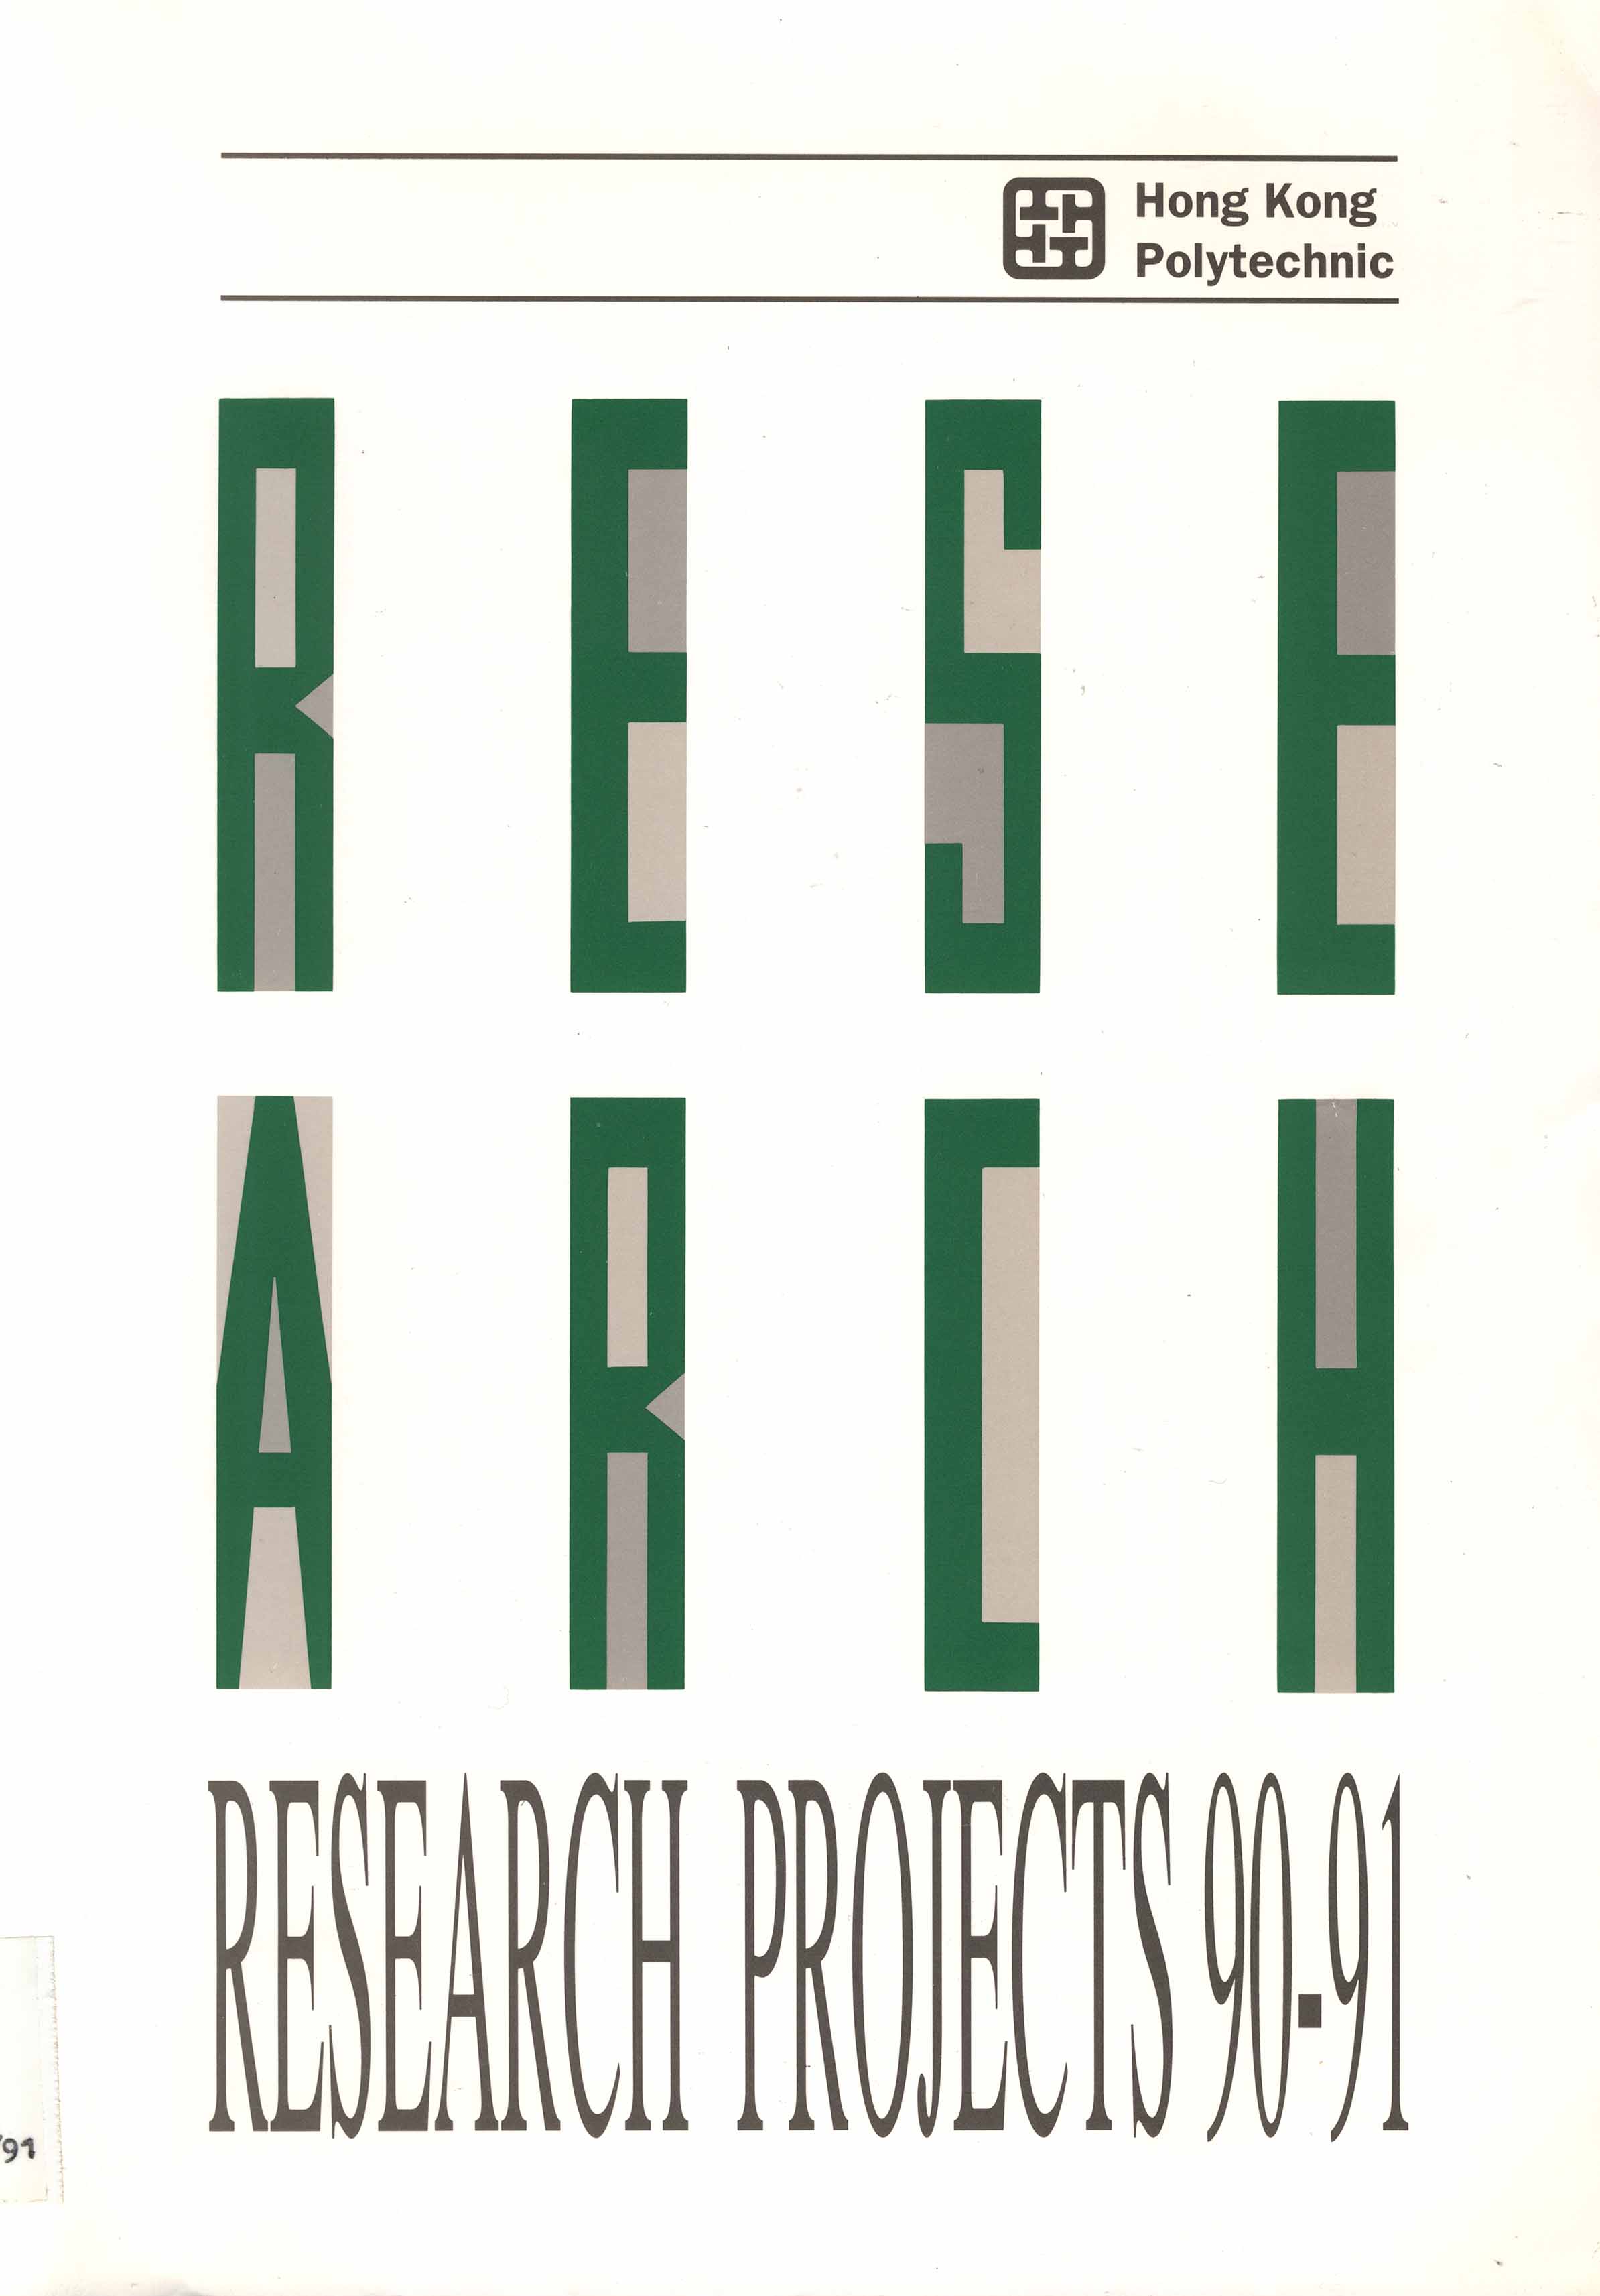 Research projects [1990-91]